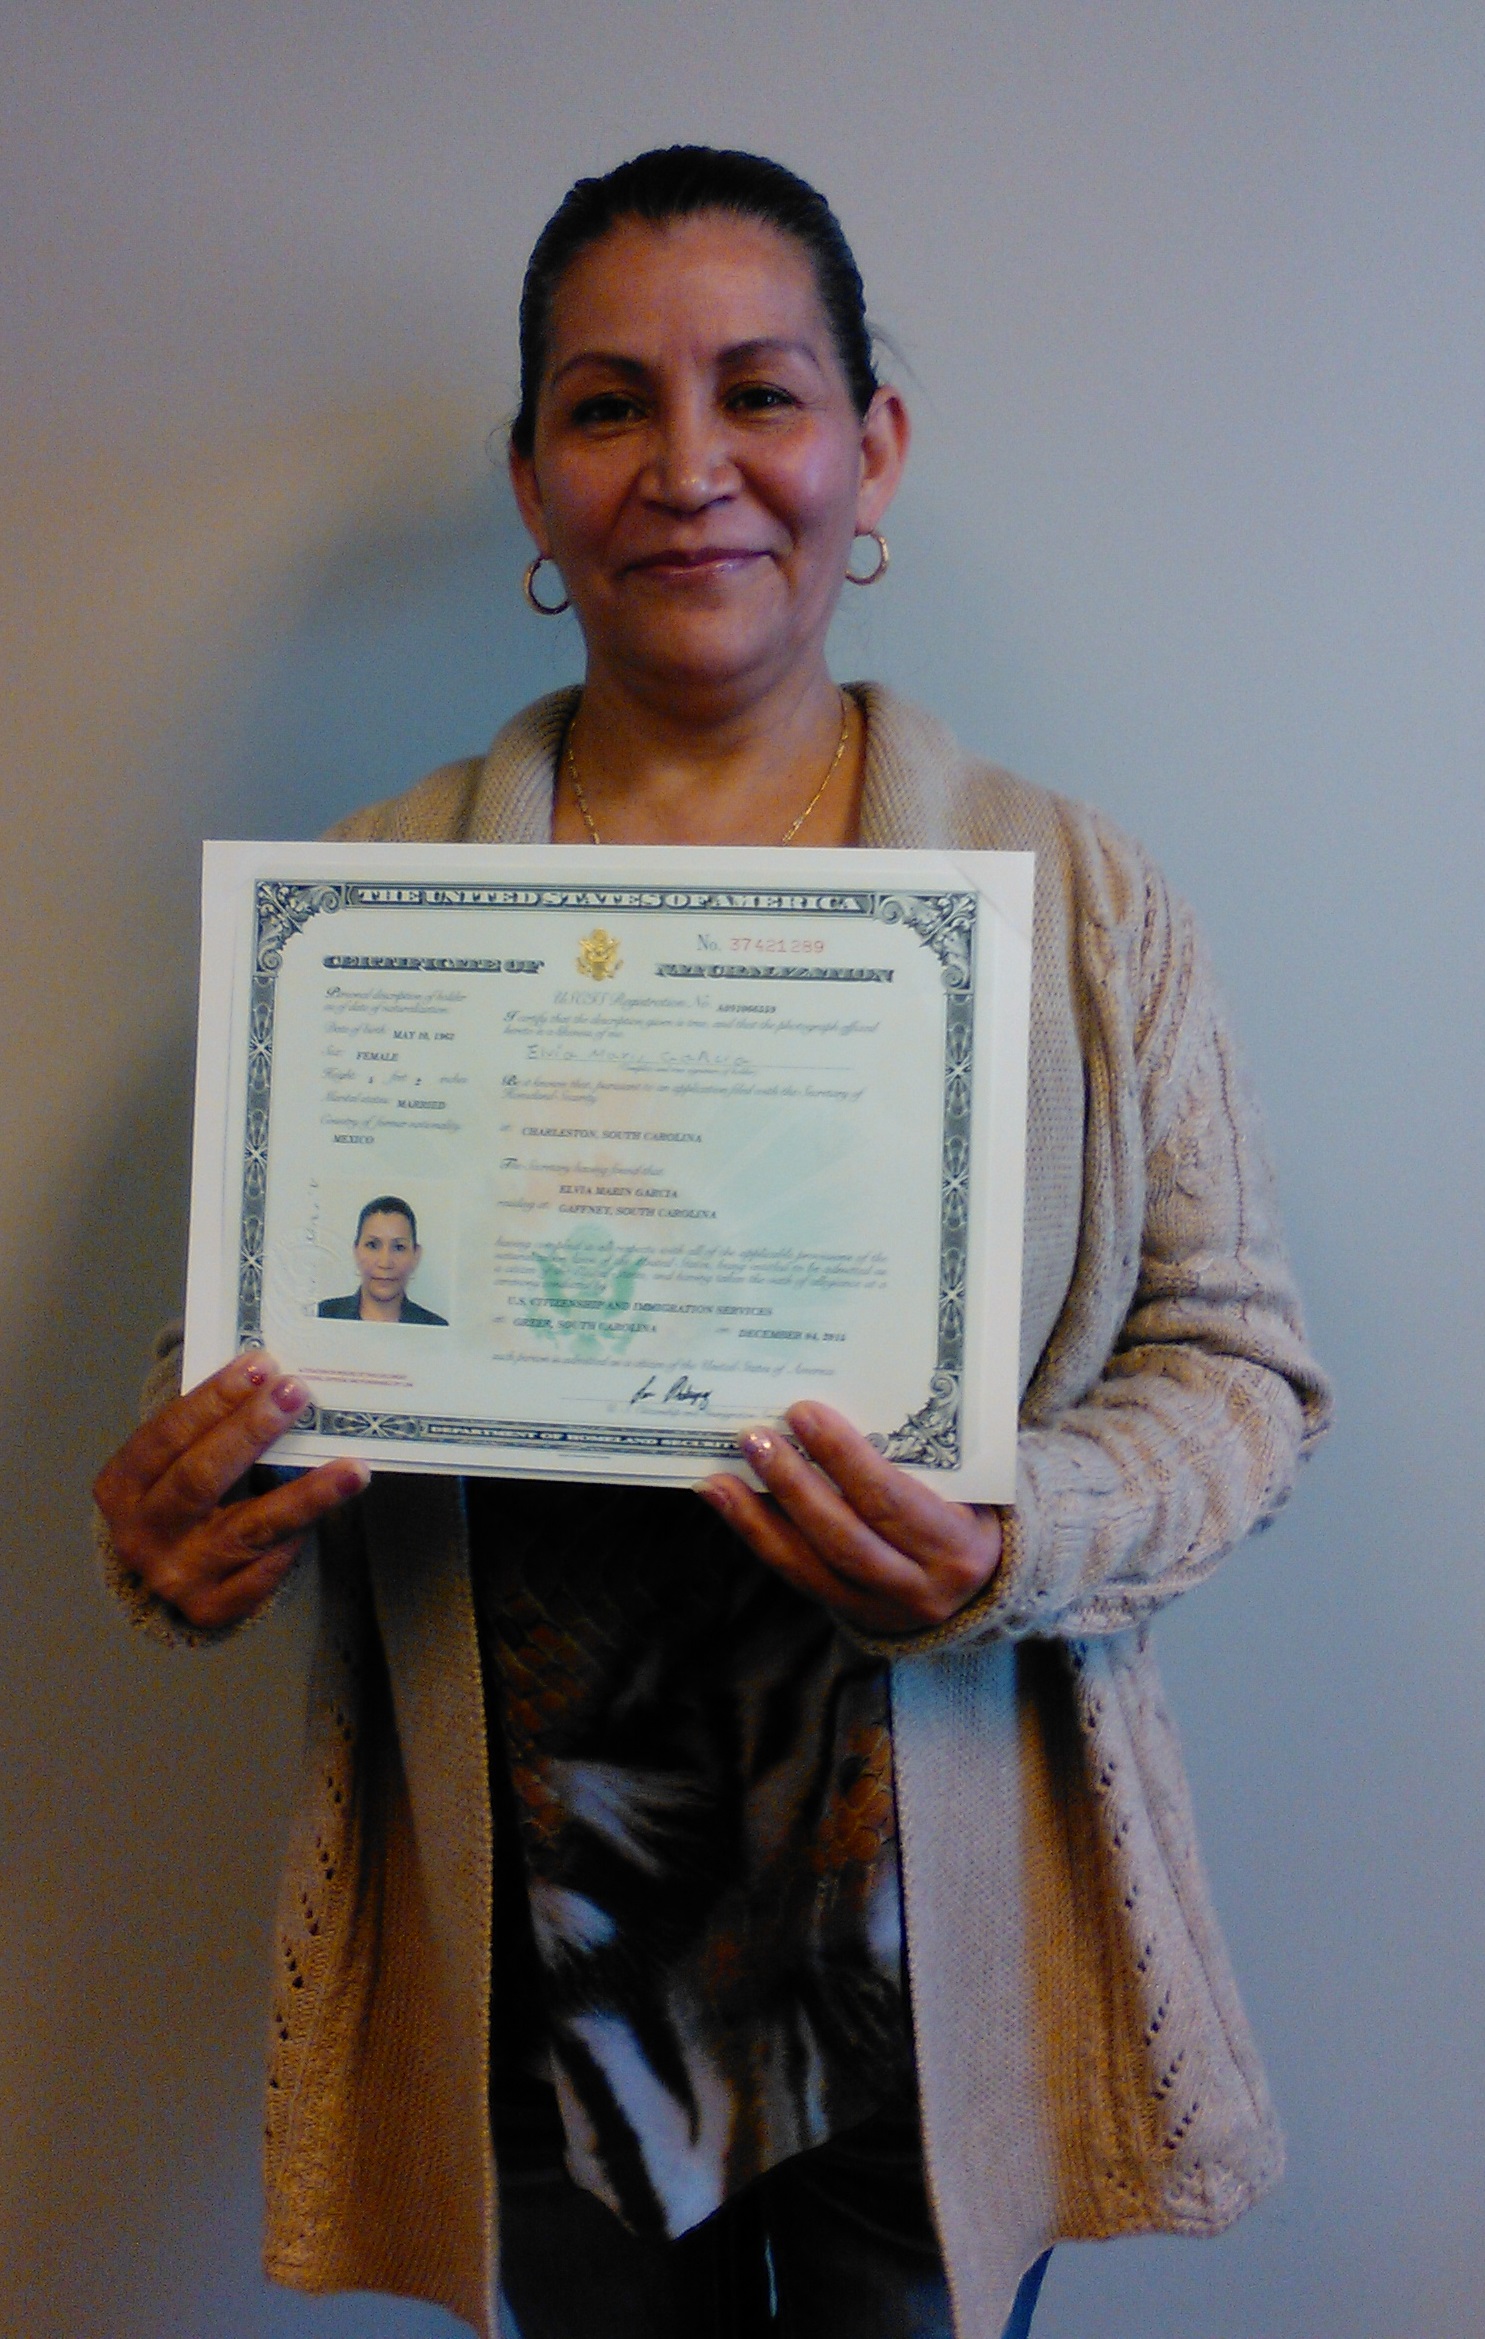 Elvia shows his certificate of citizenship, obtained with the help of lawyer Stefan Latorre.